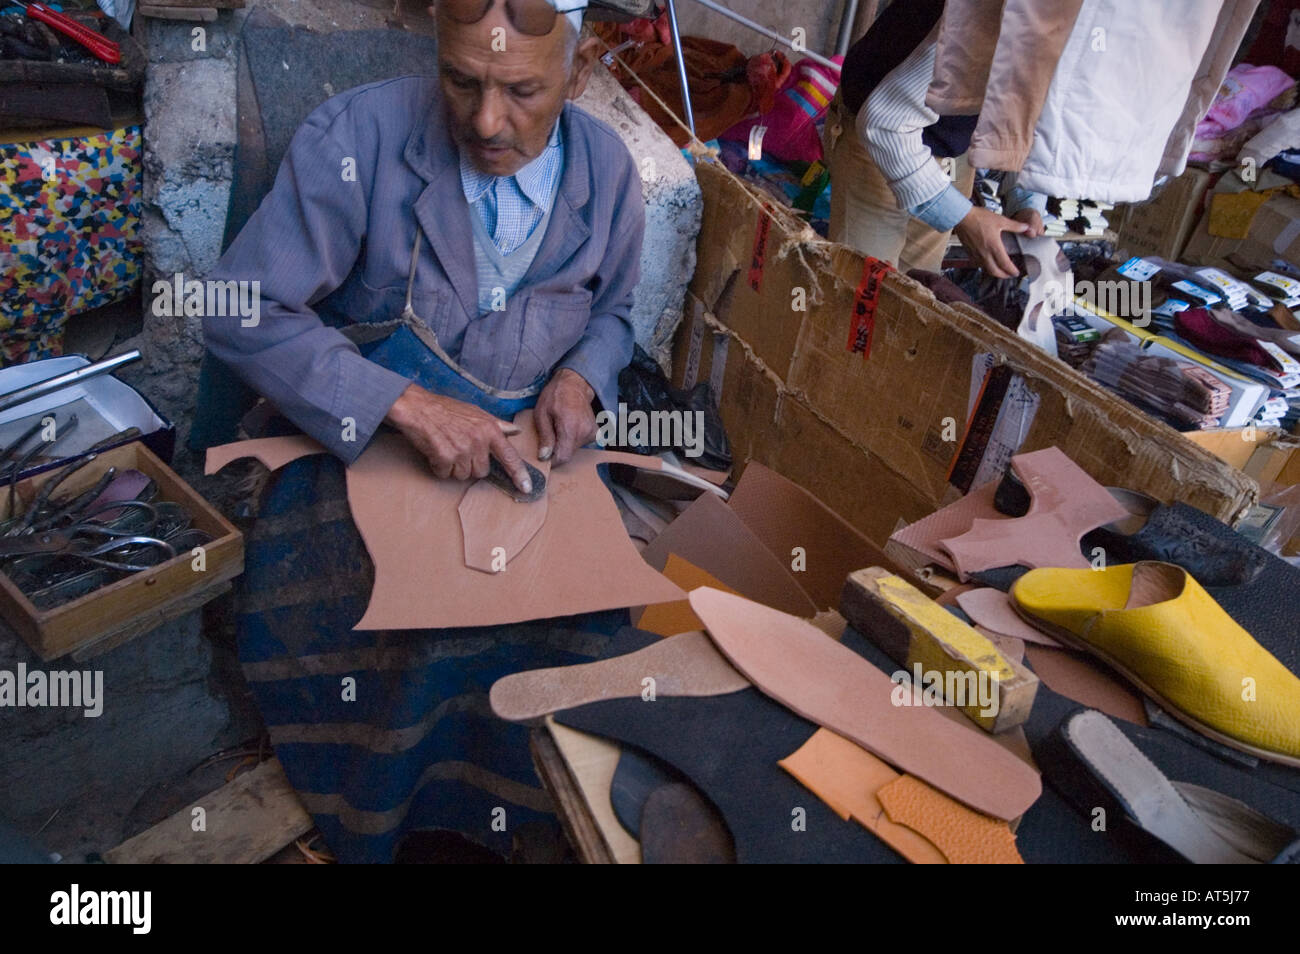 Morocco shoemaker works on leather in souk Marrakech Stock Photo